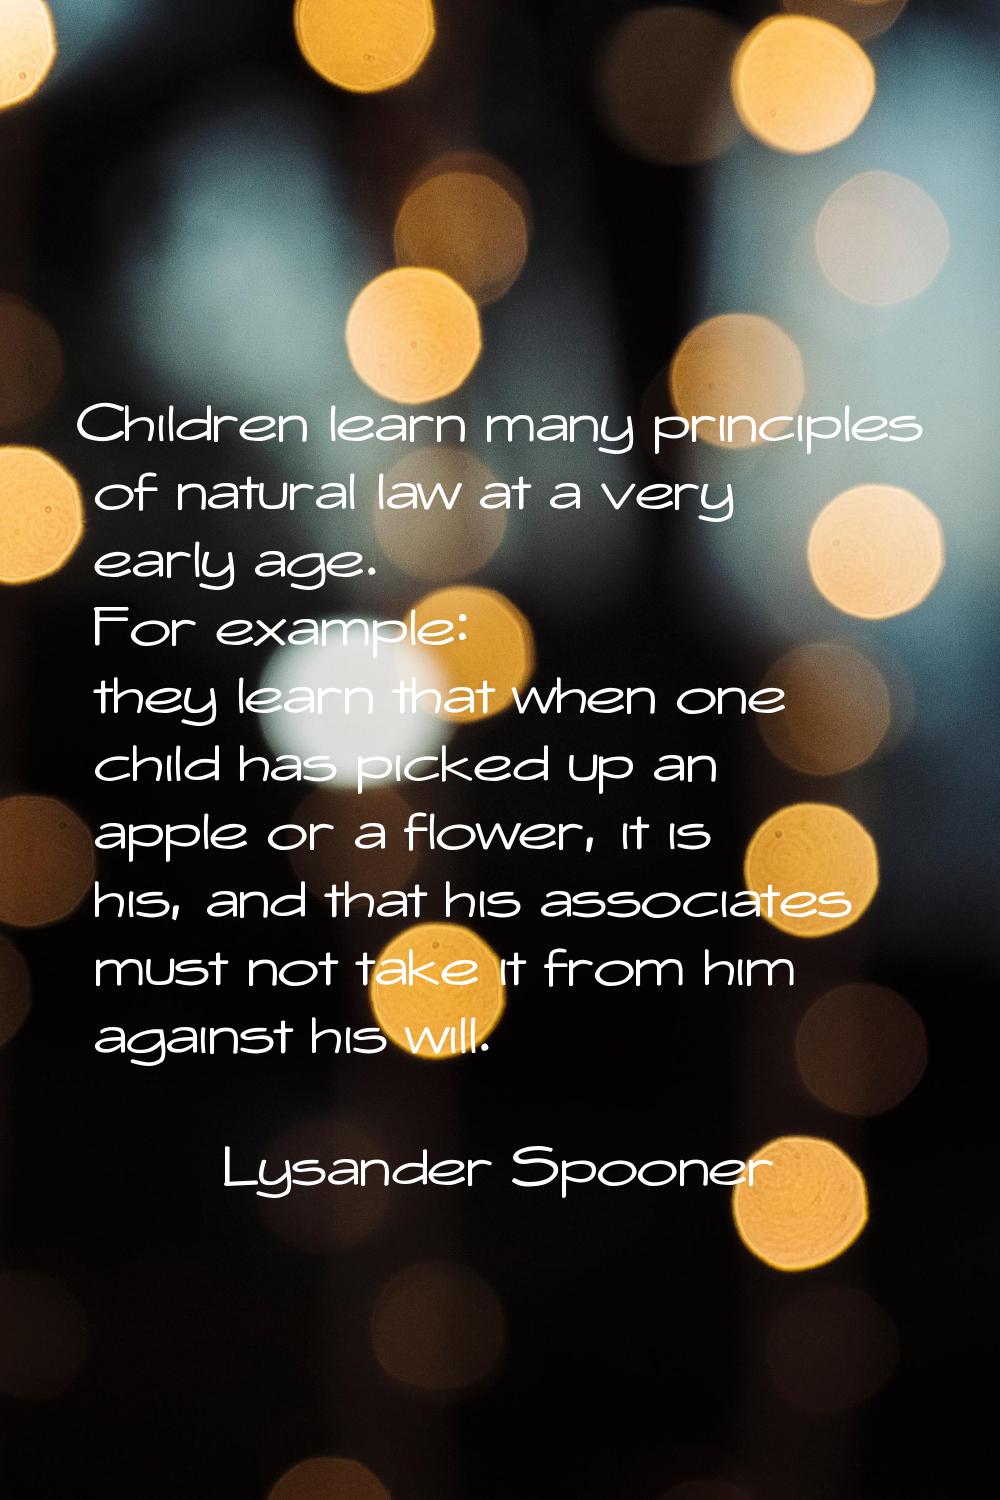 Children learn many principles of natural law at a very early age. For example: they learn that whe